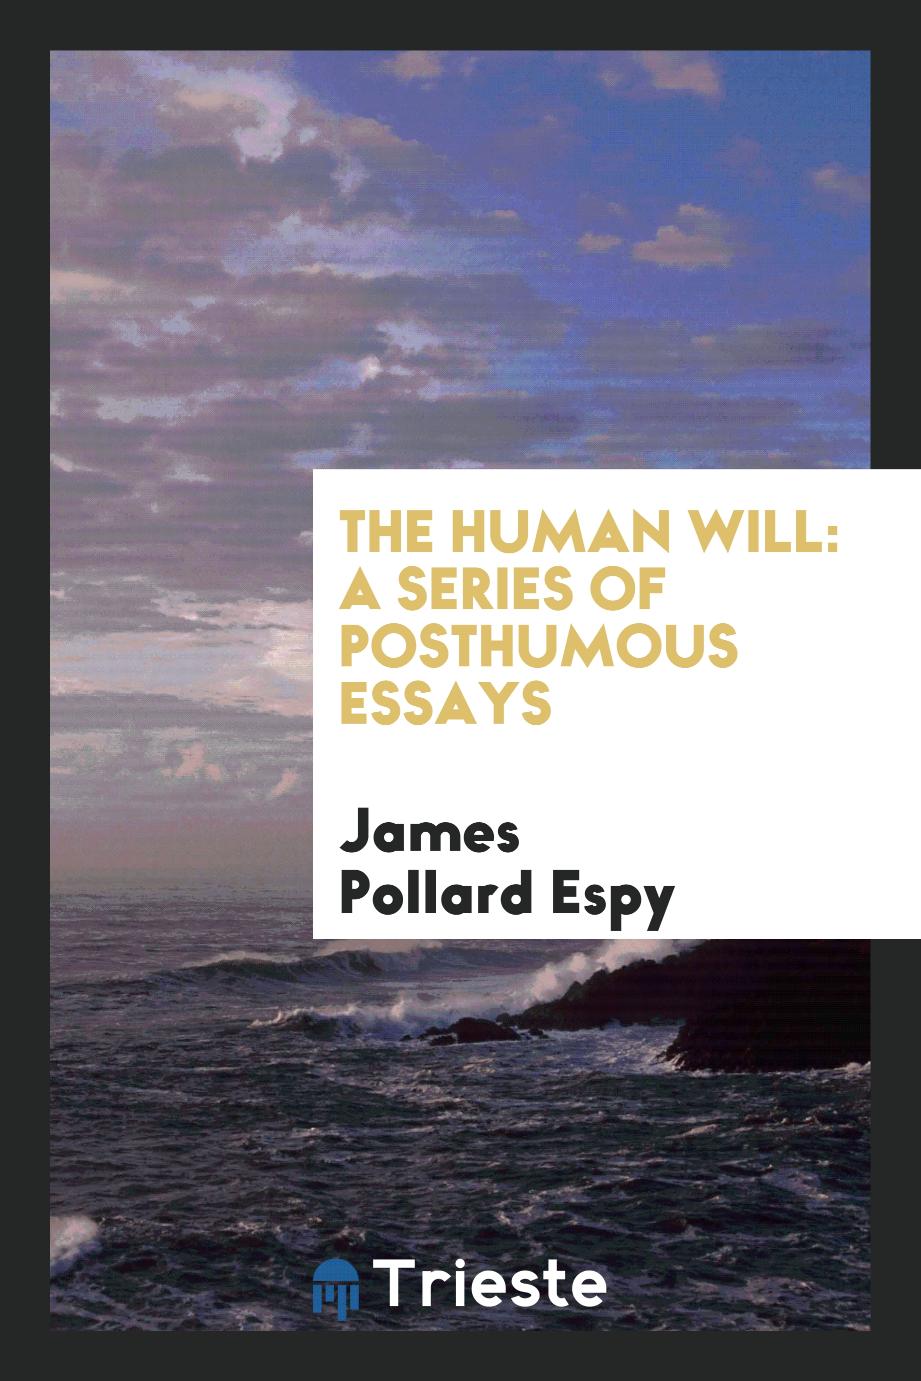 The Human Will: A Series of Posthumous Essays